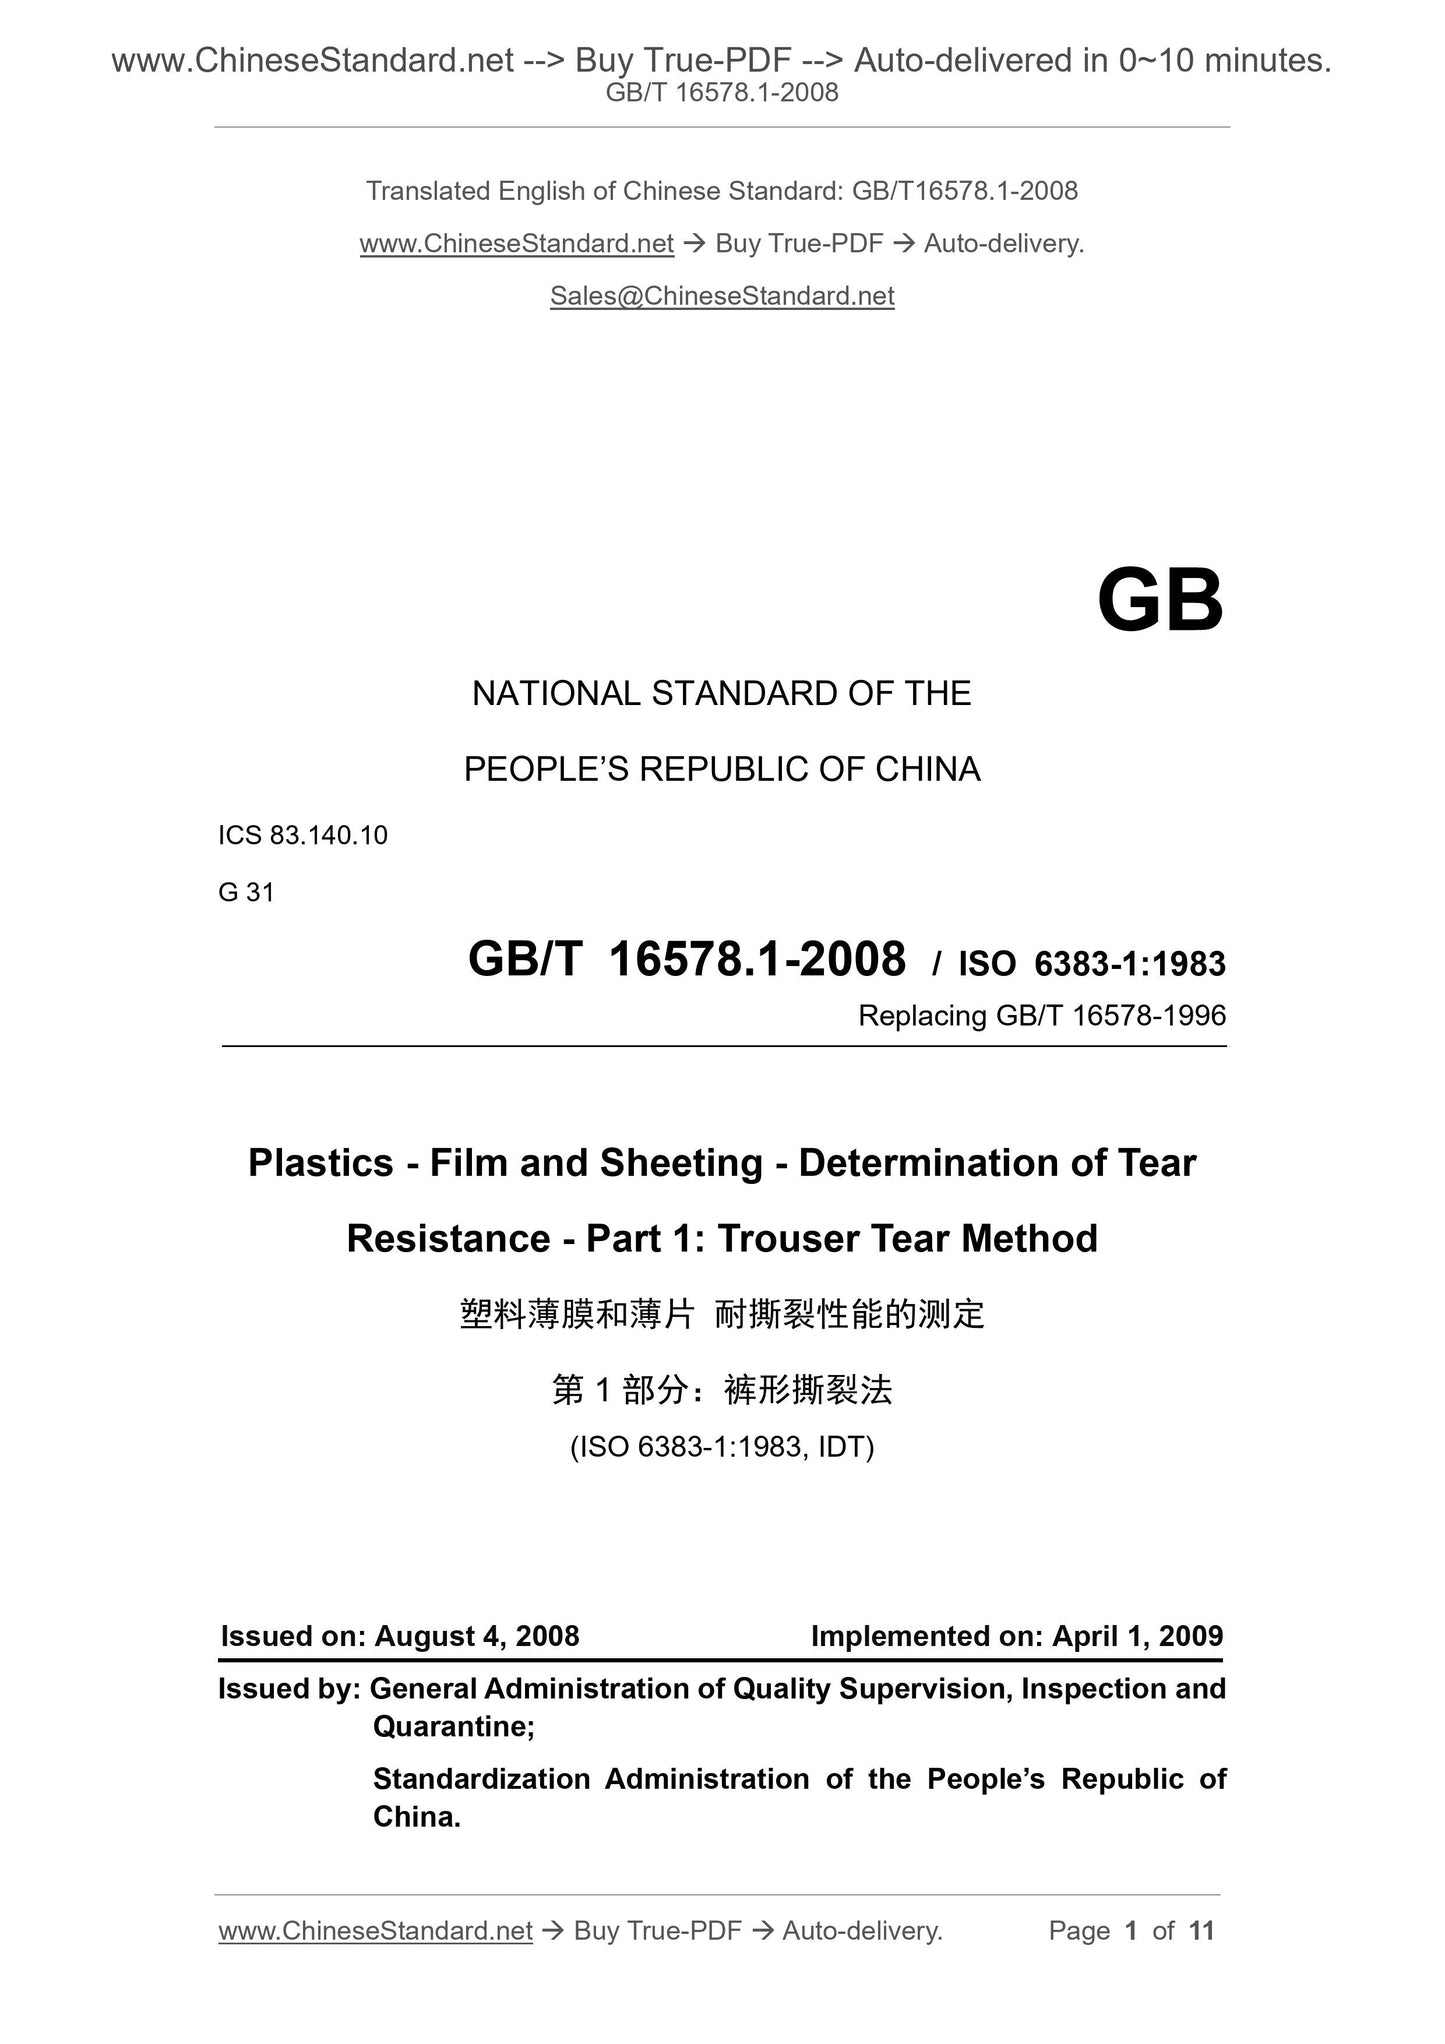 GB/T 16578.1-2008 Page 1